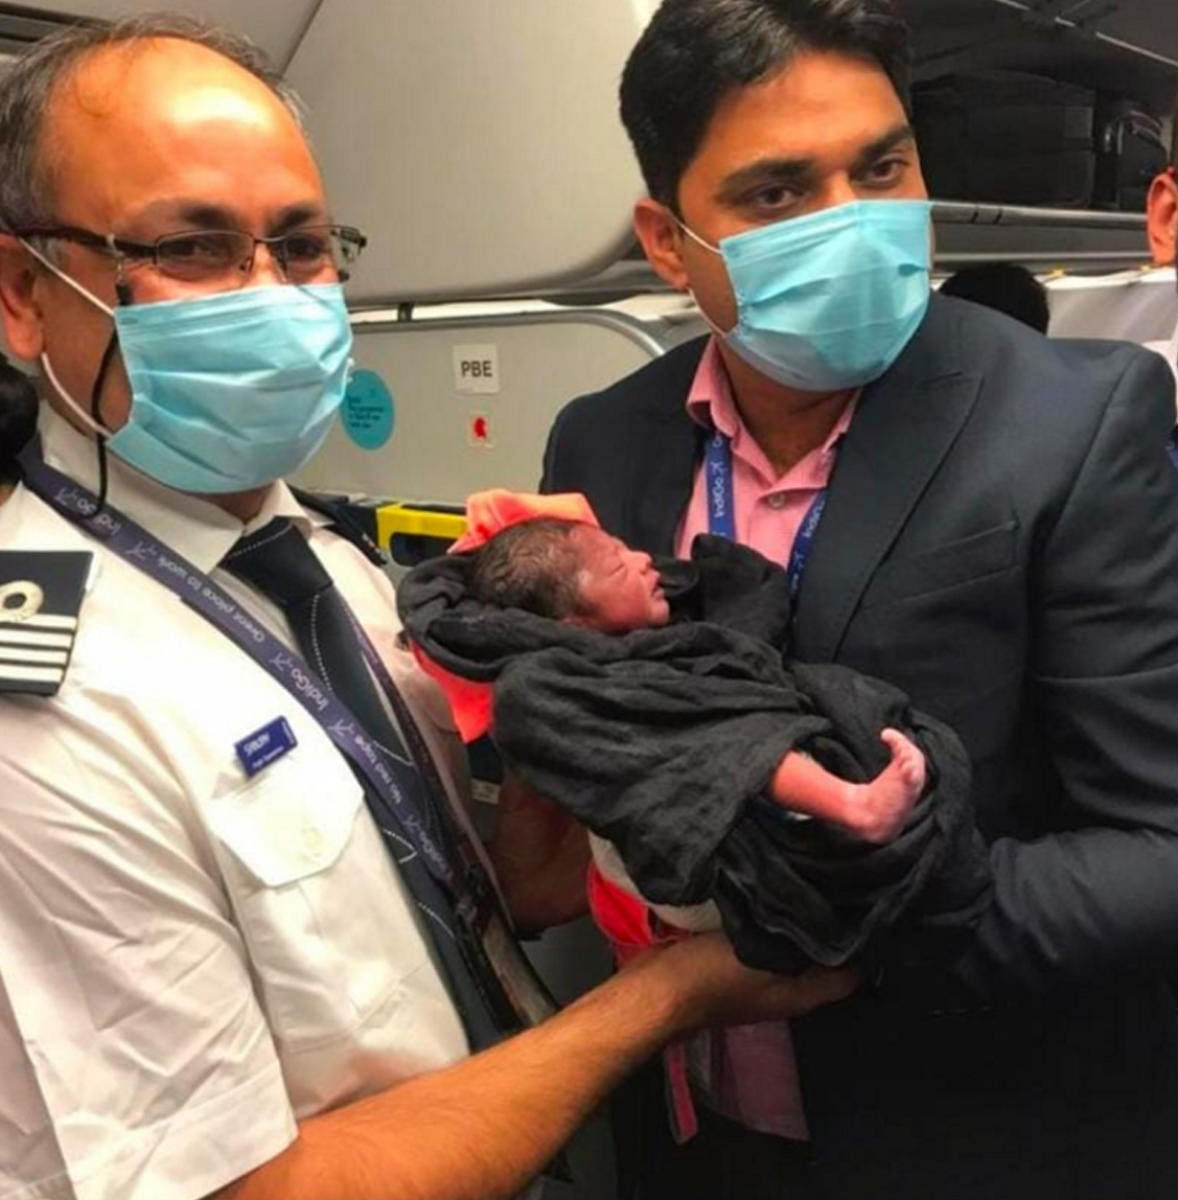 Members of the flight crew holds the baby inside the plane. 